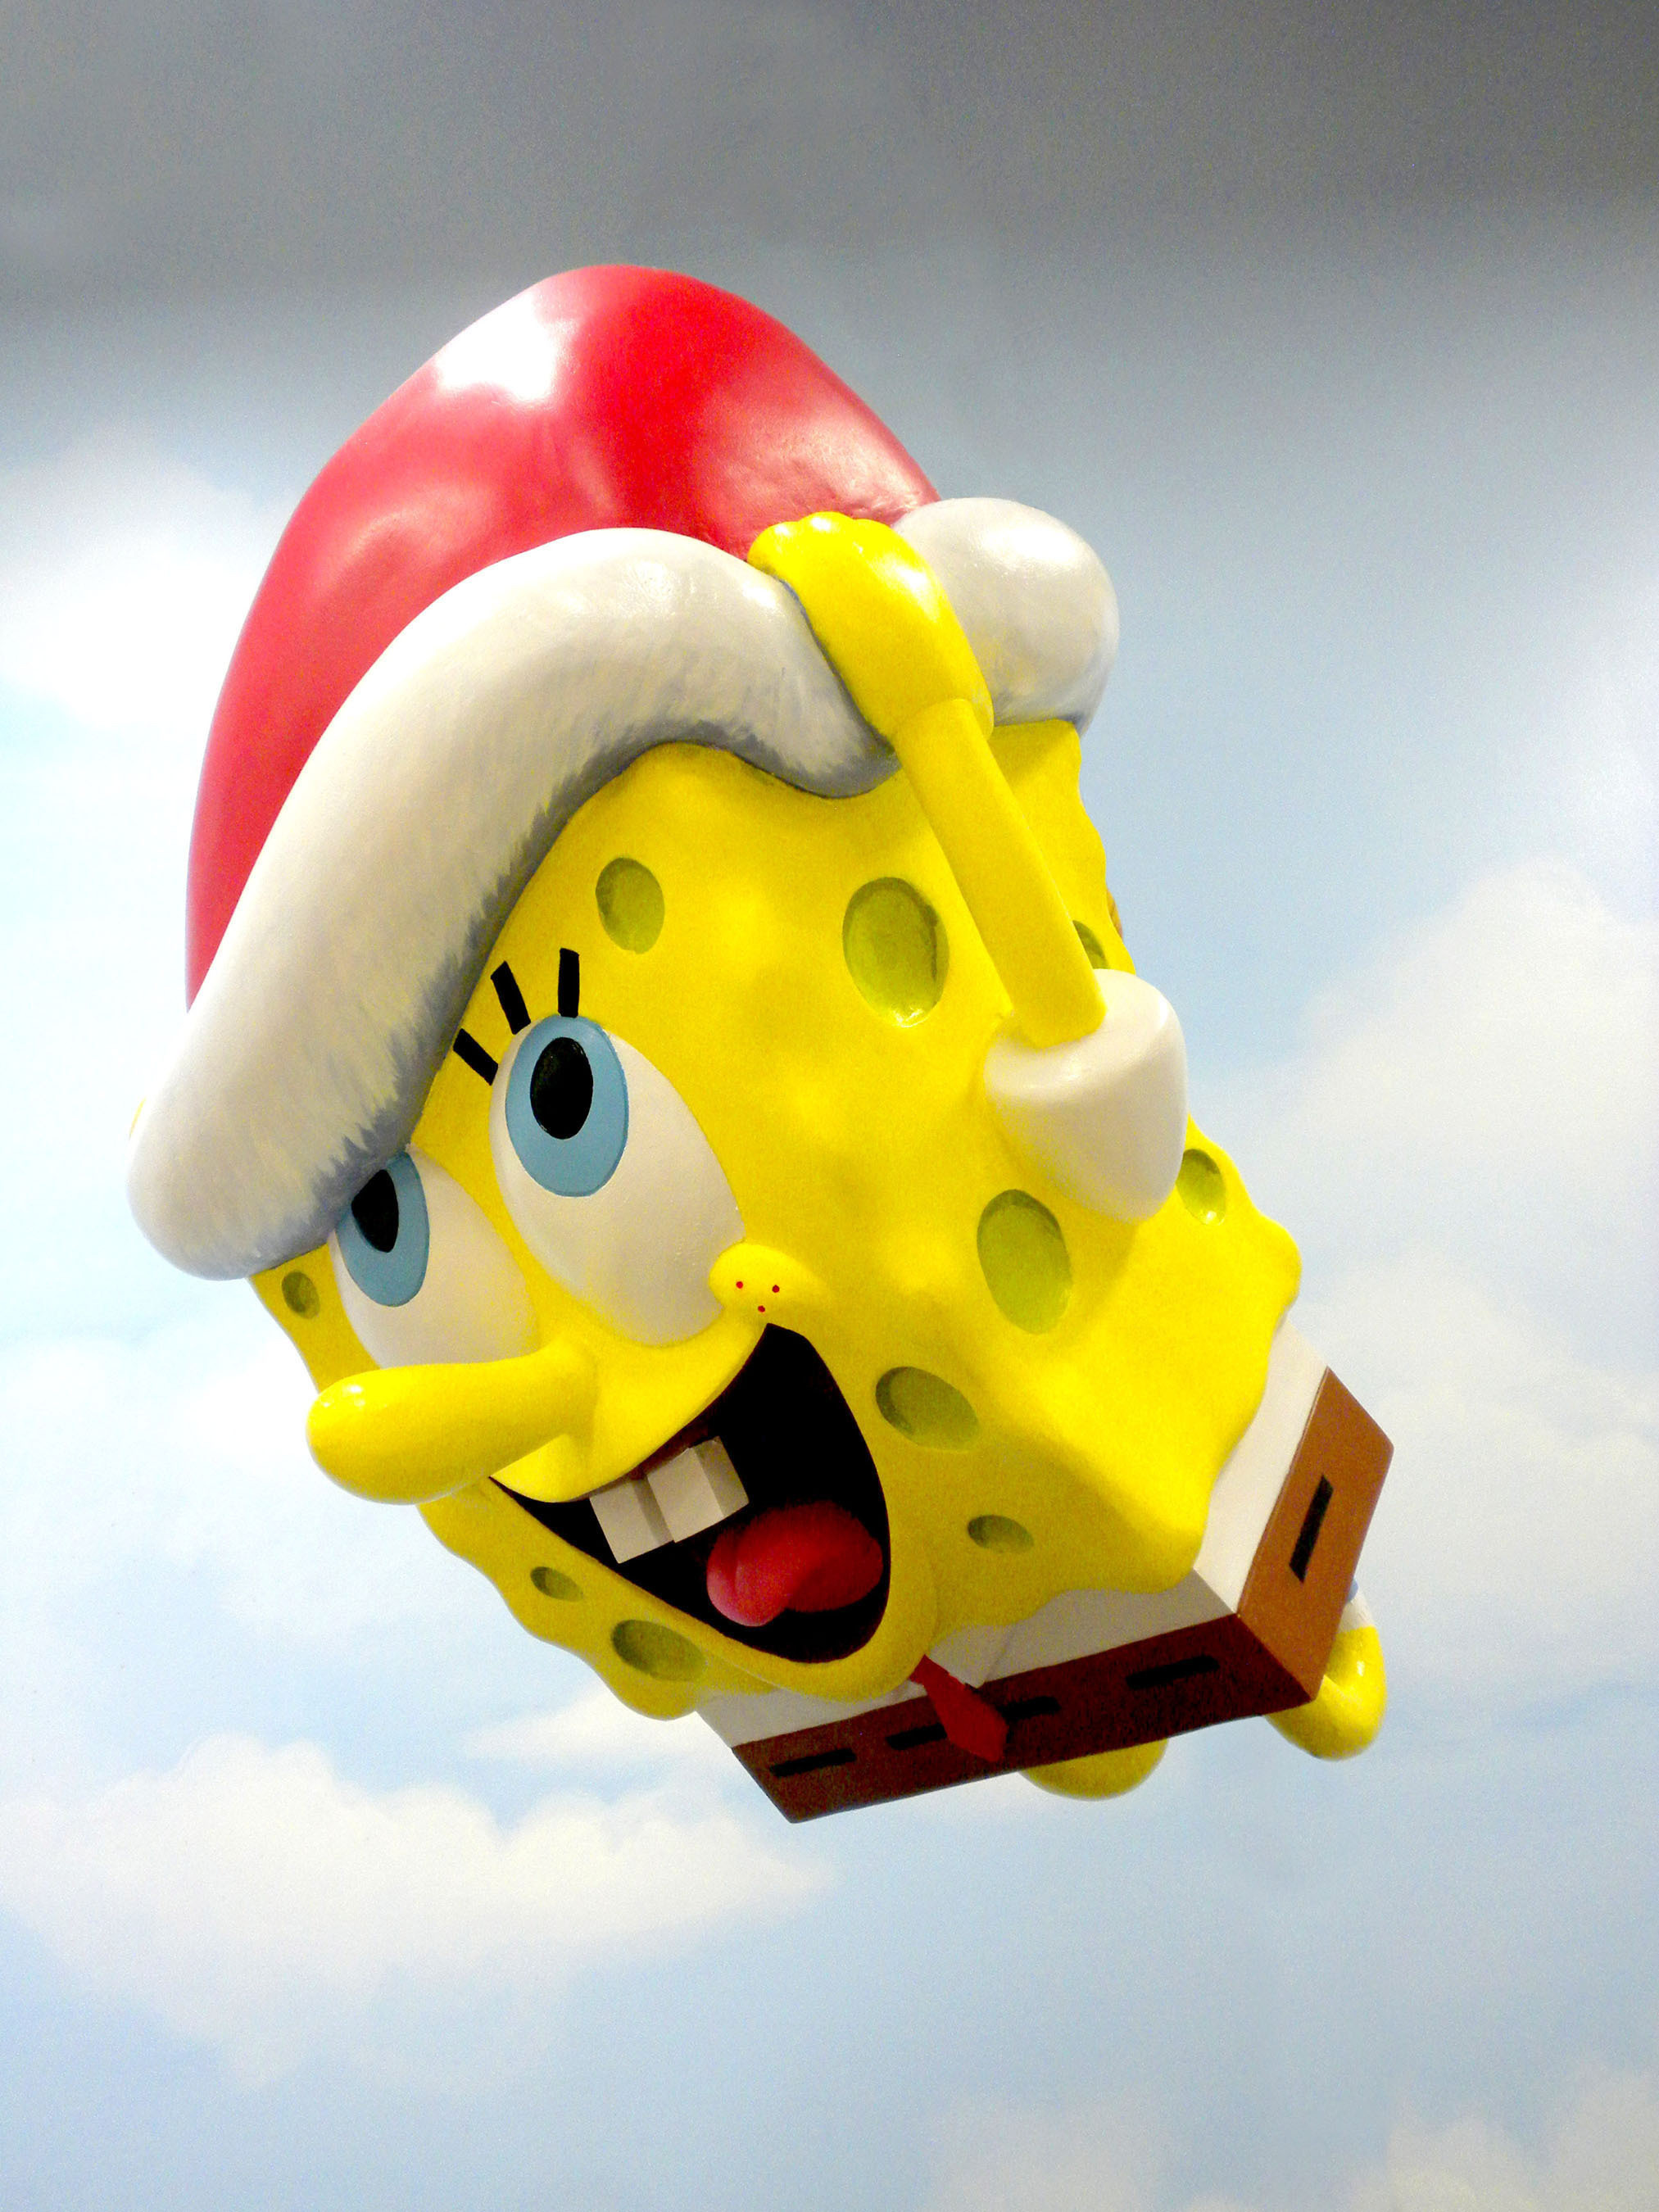 SpongeBob SquarePants Balloon Gets Holiday Makeover For 87th Annual Macy's Thanksgiving Day Parade(R).(PRNewsFoto/Nickelodeon) (PRNewsFoto/NICKELODEON)